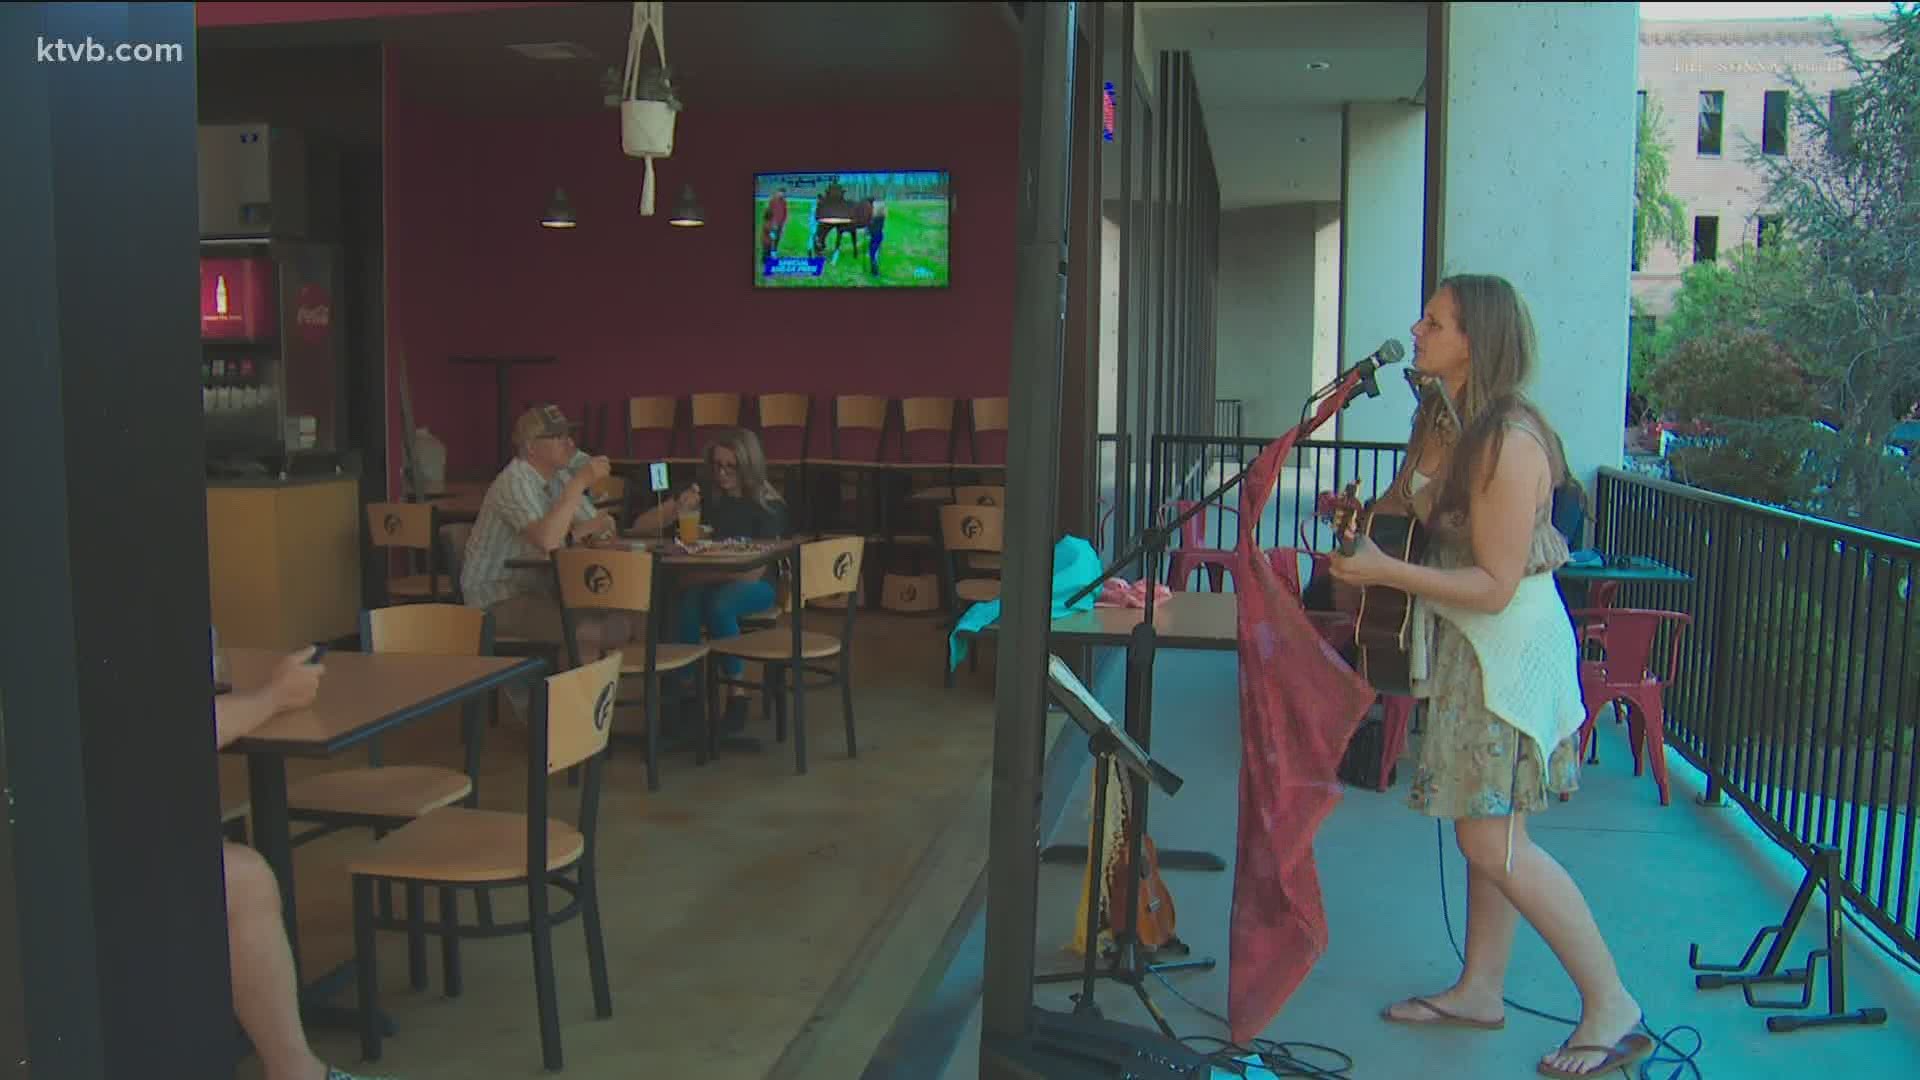 The Boise Revival Project is aimed to help bars, restaurants and musicians after a lean year.